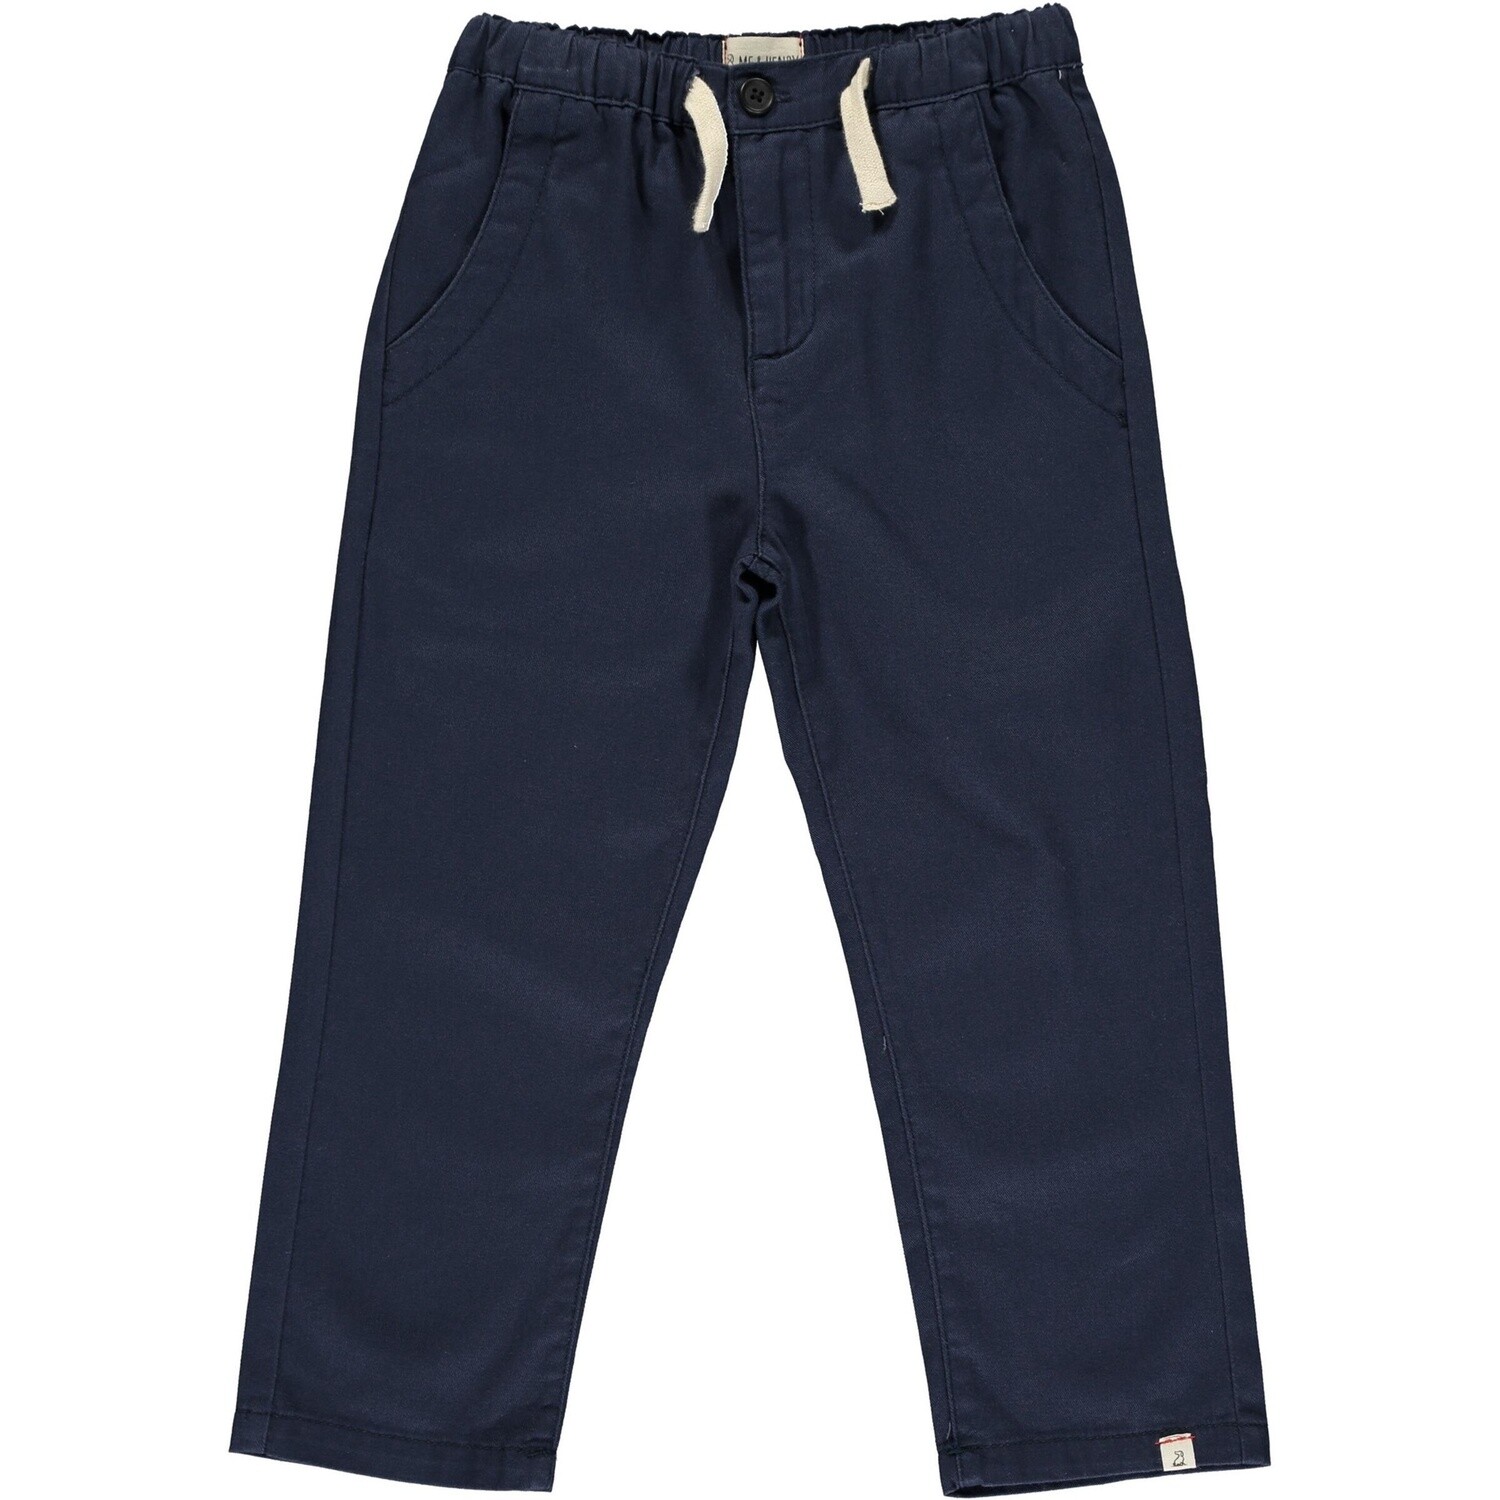 Twill Button/Tie Pants